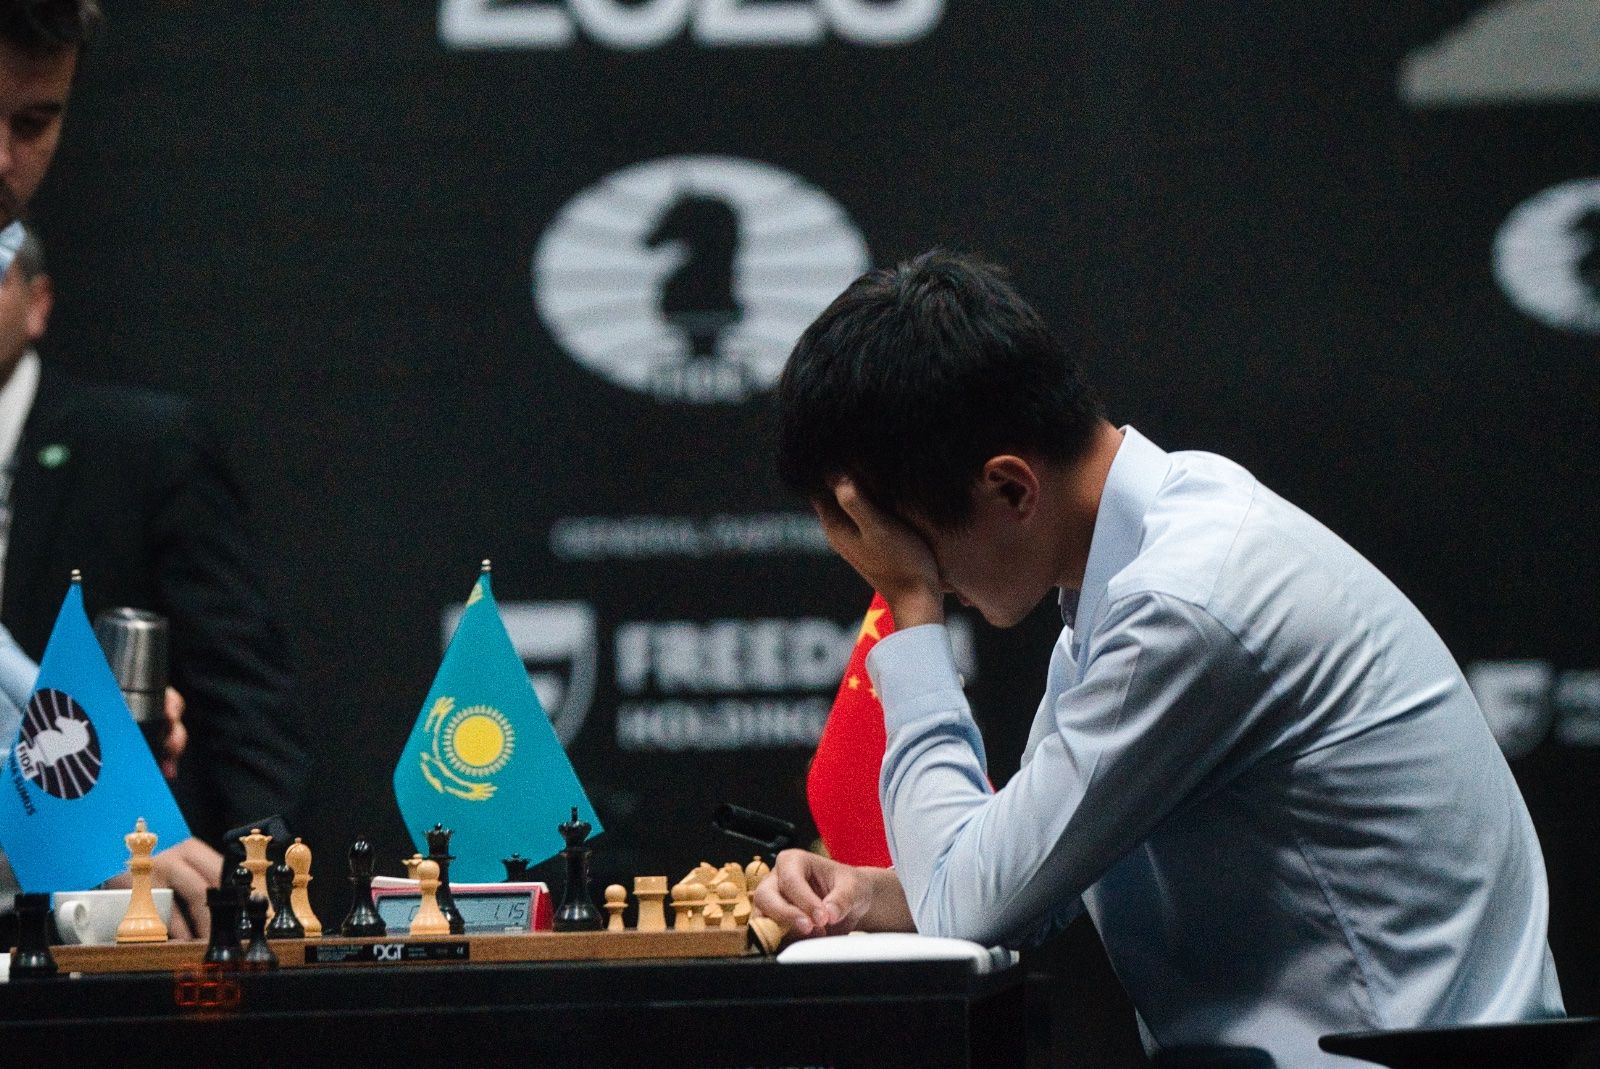 Ding Liren is the new World Chess Champion!